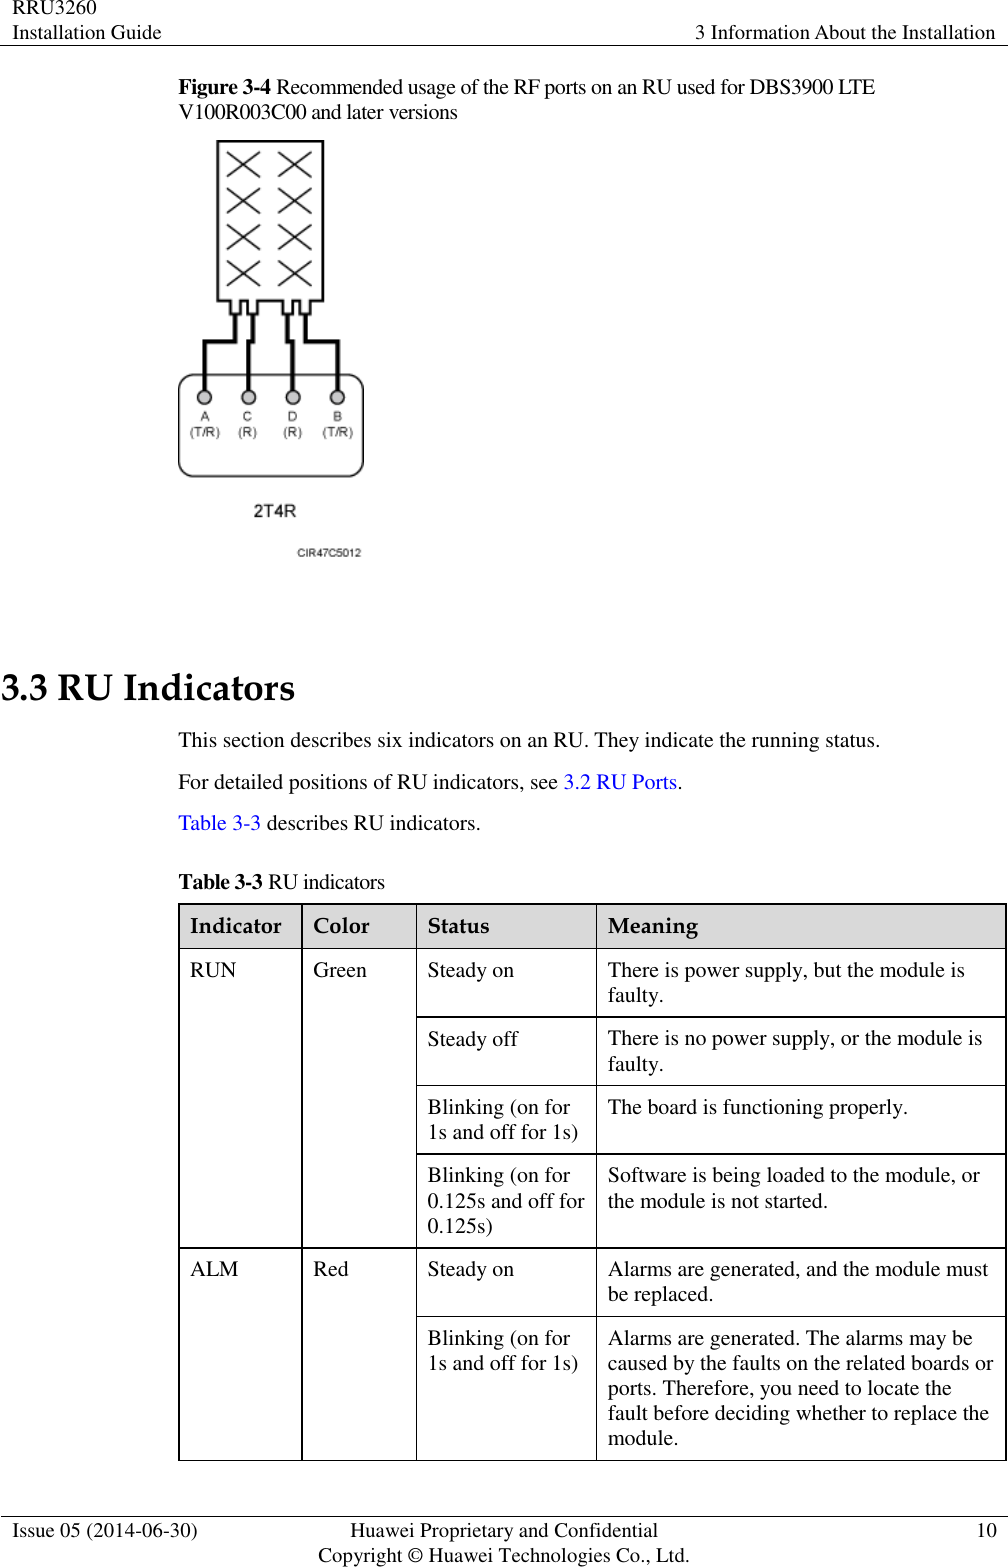 RRU3260 Installation Guide 3 Information About the Installation  Issue 05 (2014-06-30) Huawei Proprietary and Confidential                                     Copyright © Huawei Technologies Co., Ltd. 10  Figure 3-4 Recommended usage of the RF ports on an RU used for DBS3900 LTE V100R003C00 and later versions   3.3 RU Indicators This section describes six indicators on an RU. They indicate the running status.   For detailed positions of RU indicators, see 3.2 RU Ports. Table 3-3 describes RU indicators. Table 3-3 RU indicators Indicator Color Status Meaning RUN Green Steady on There is power supply, but the module is faulty. Steady off There is no power supply, or the module is faulty. Blinking (on for 1s and off for 1s) The board is functioning properly. Blinking (on for 0.125s and off for 0.125s) Software is being loaded to the module, or the module is not started. ALM Red Steady on Alarms are generated, and the module must be replaced. Blinking (on for 1s and off for 1s) Alarms are generated. The alarms may be caused by the faults on the related boards or ports. Therefore, you need to locate the fault before deciding whether to replace the module. 